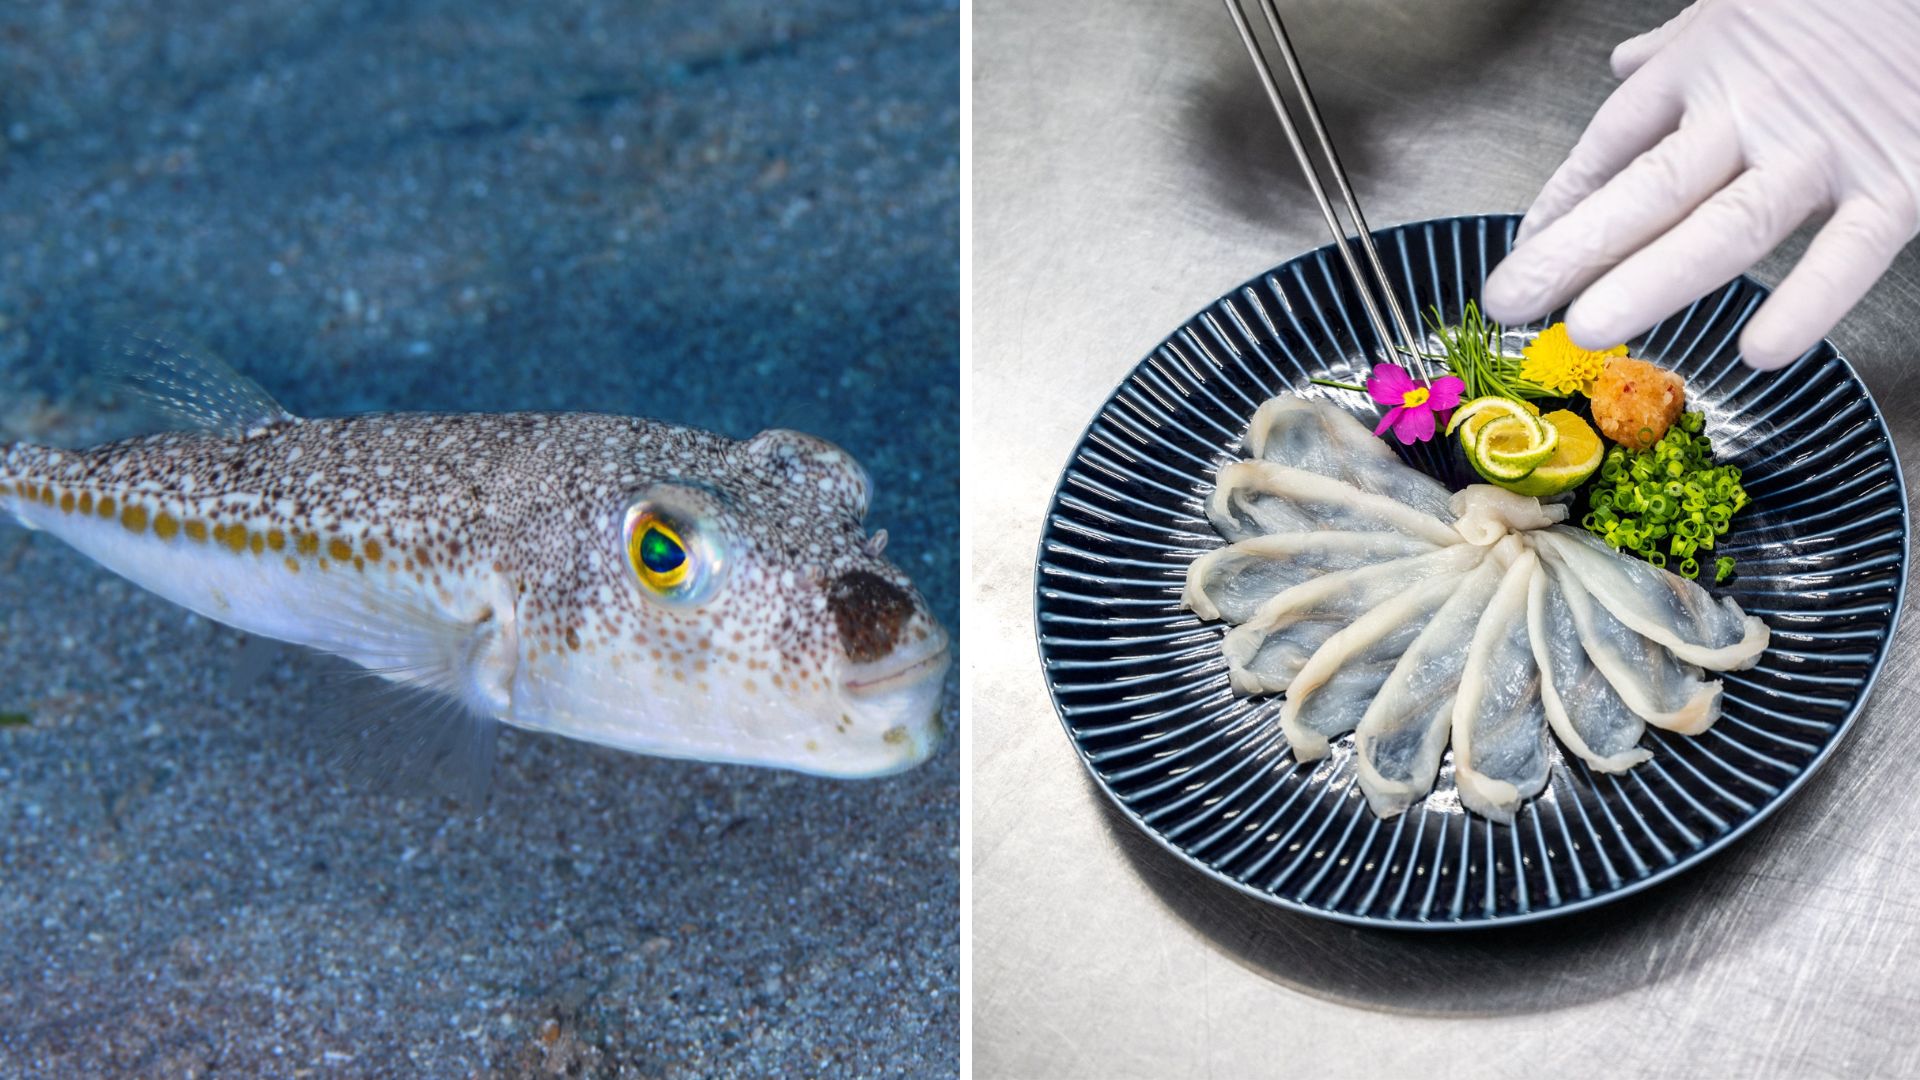 Elderly couple dies after eating poisonous pufferfish for lunch